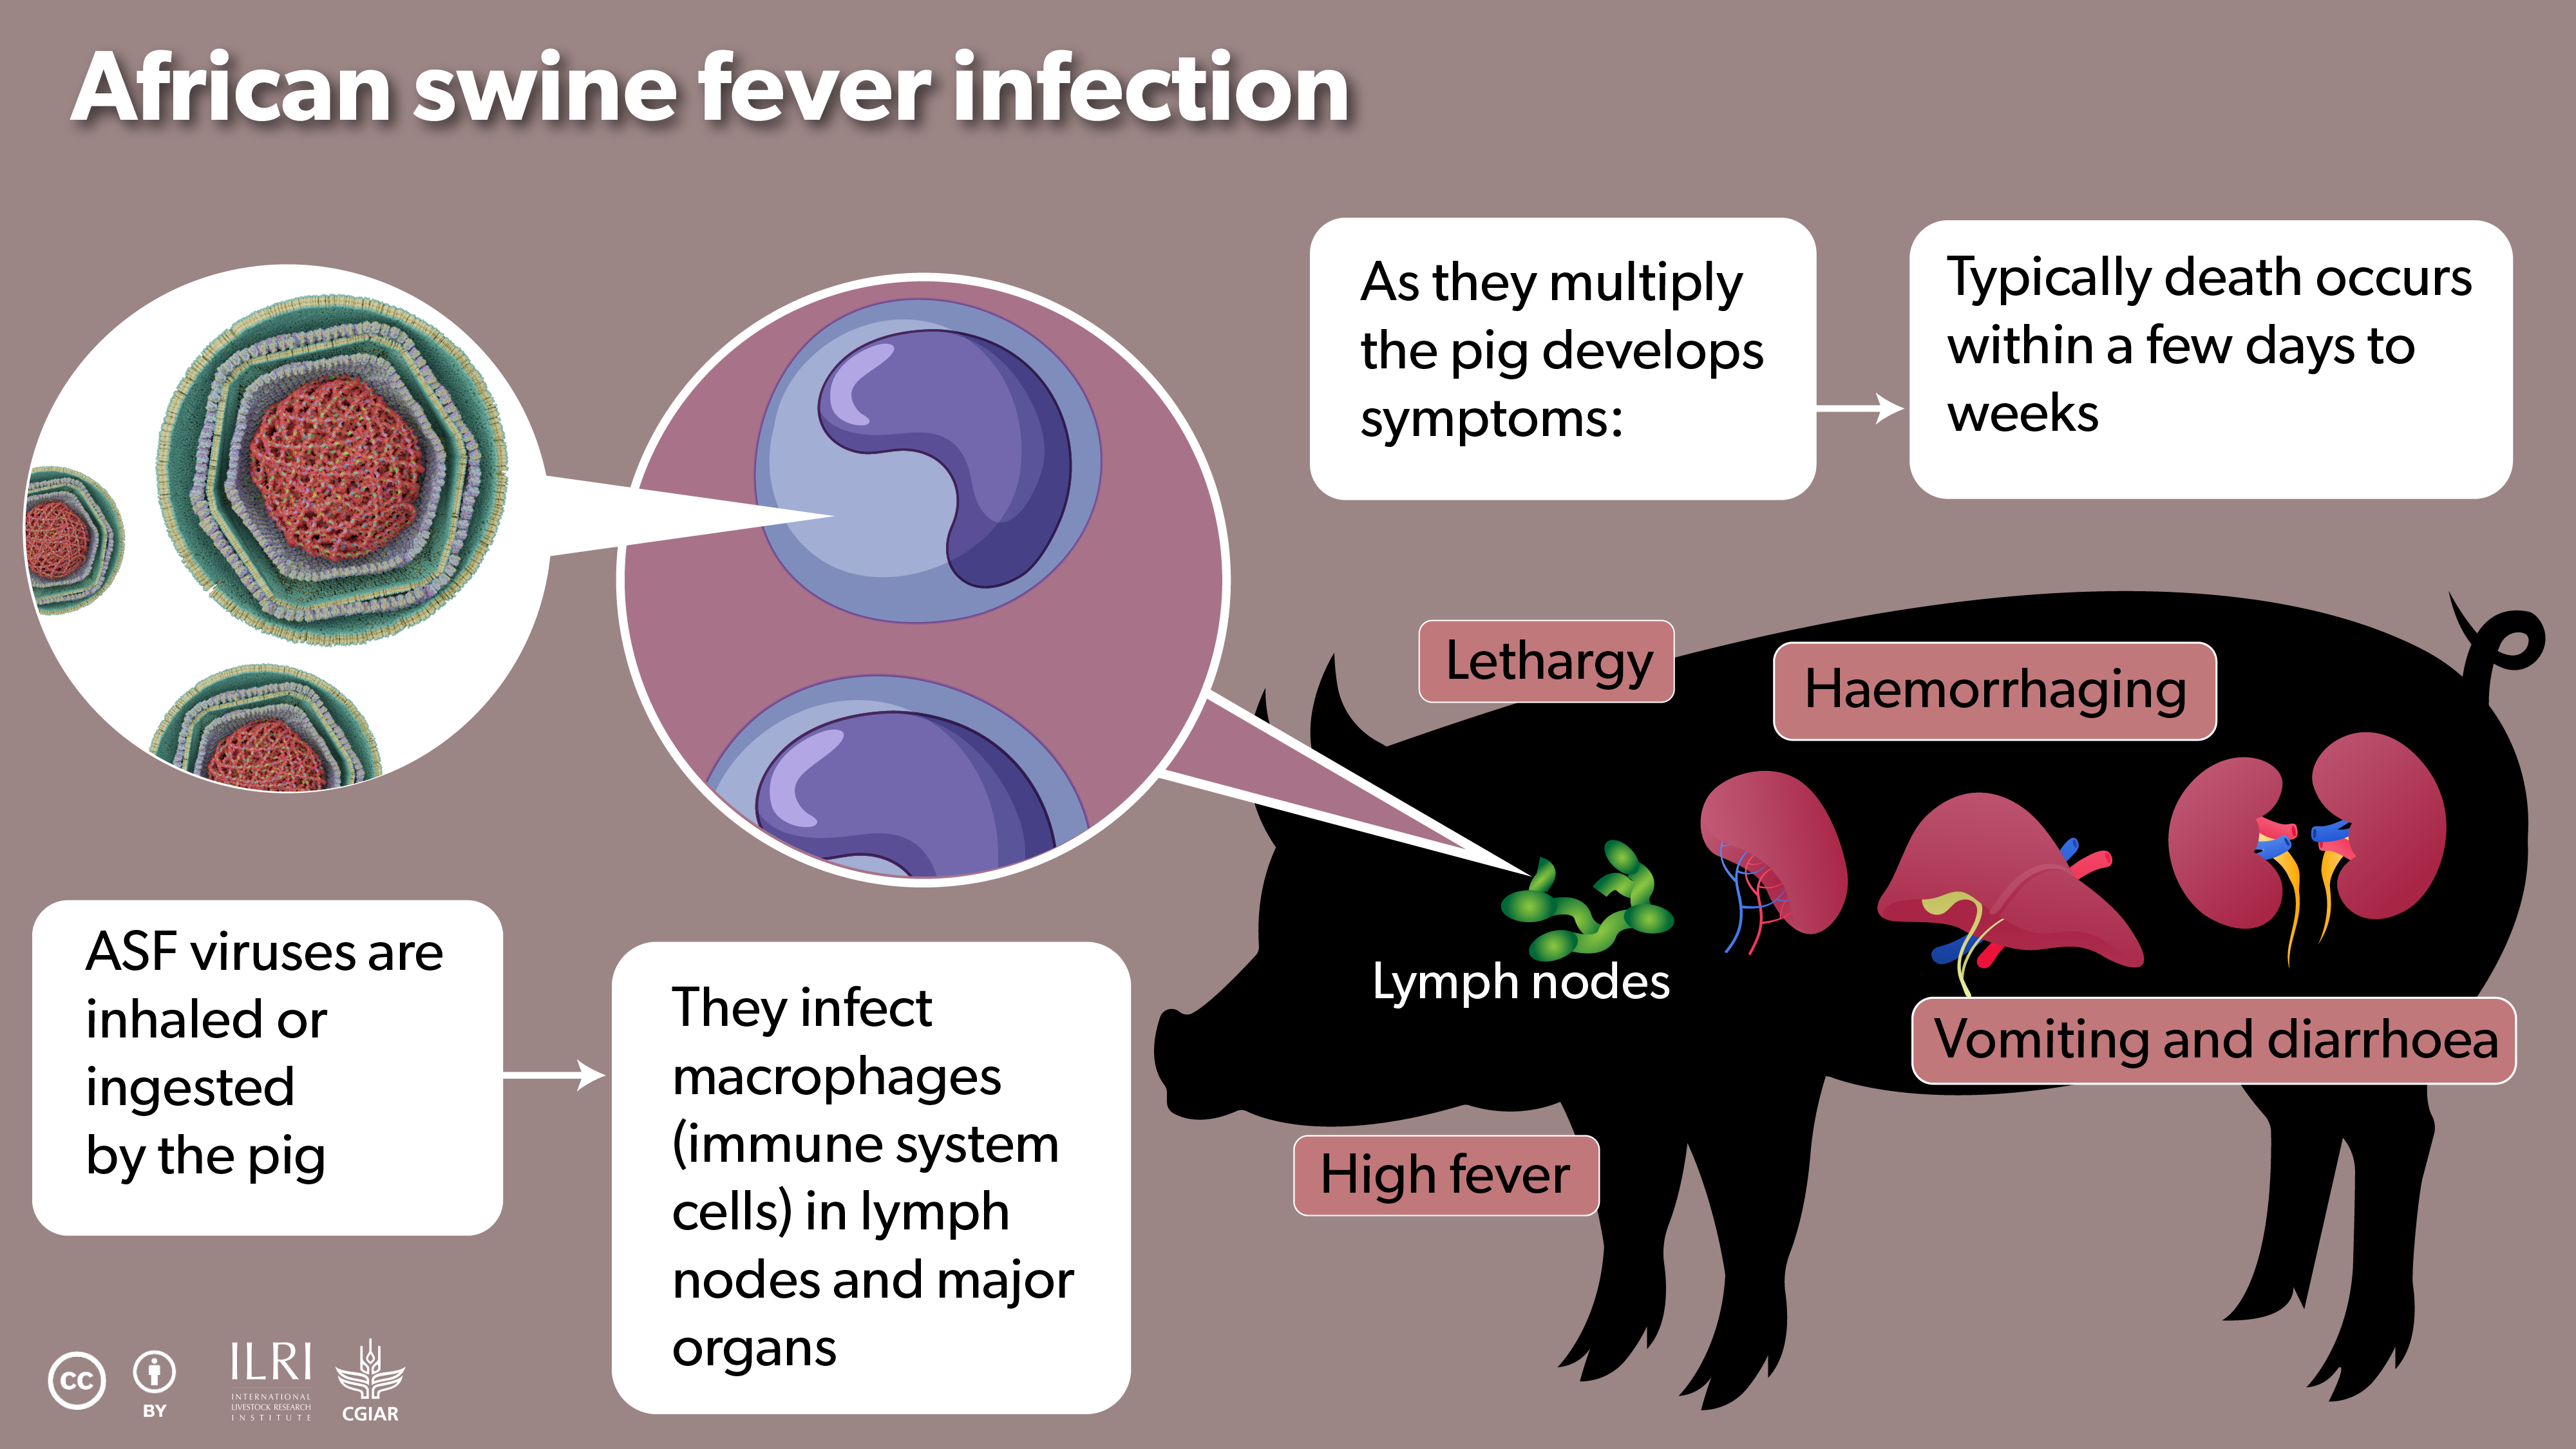 ASF virus infection